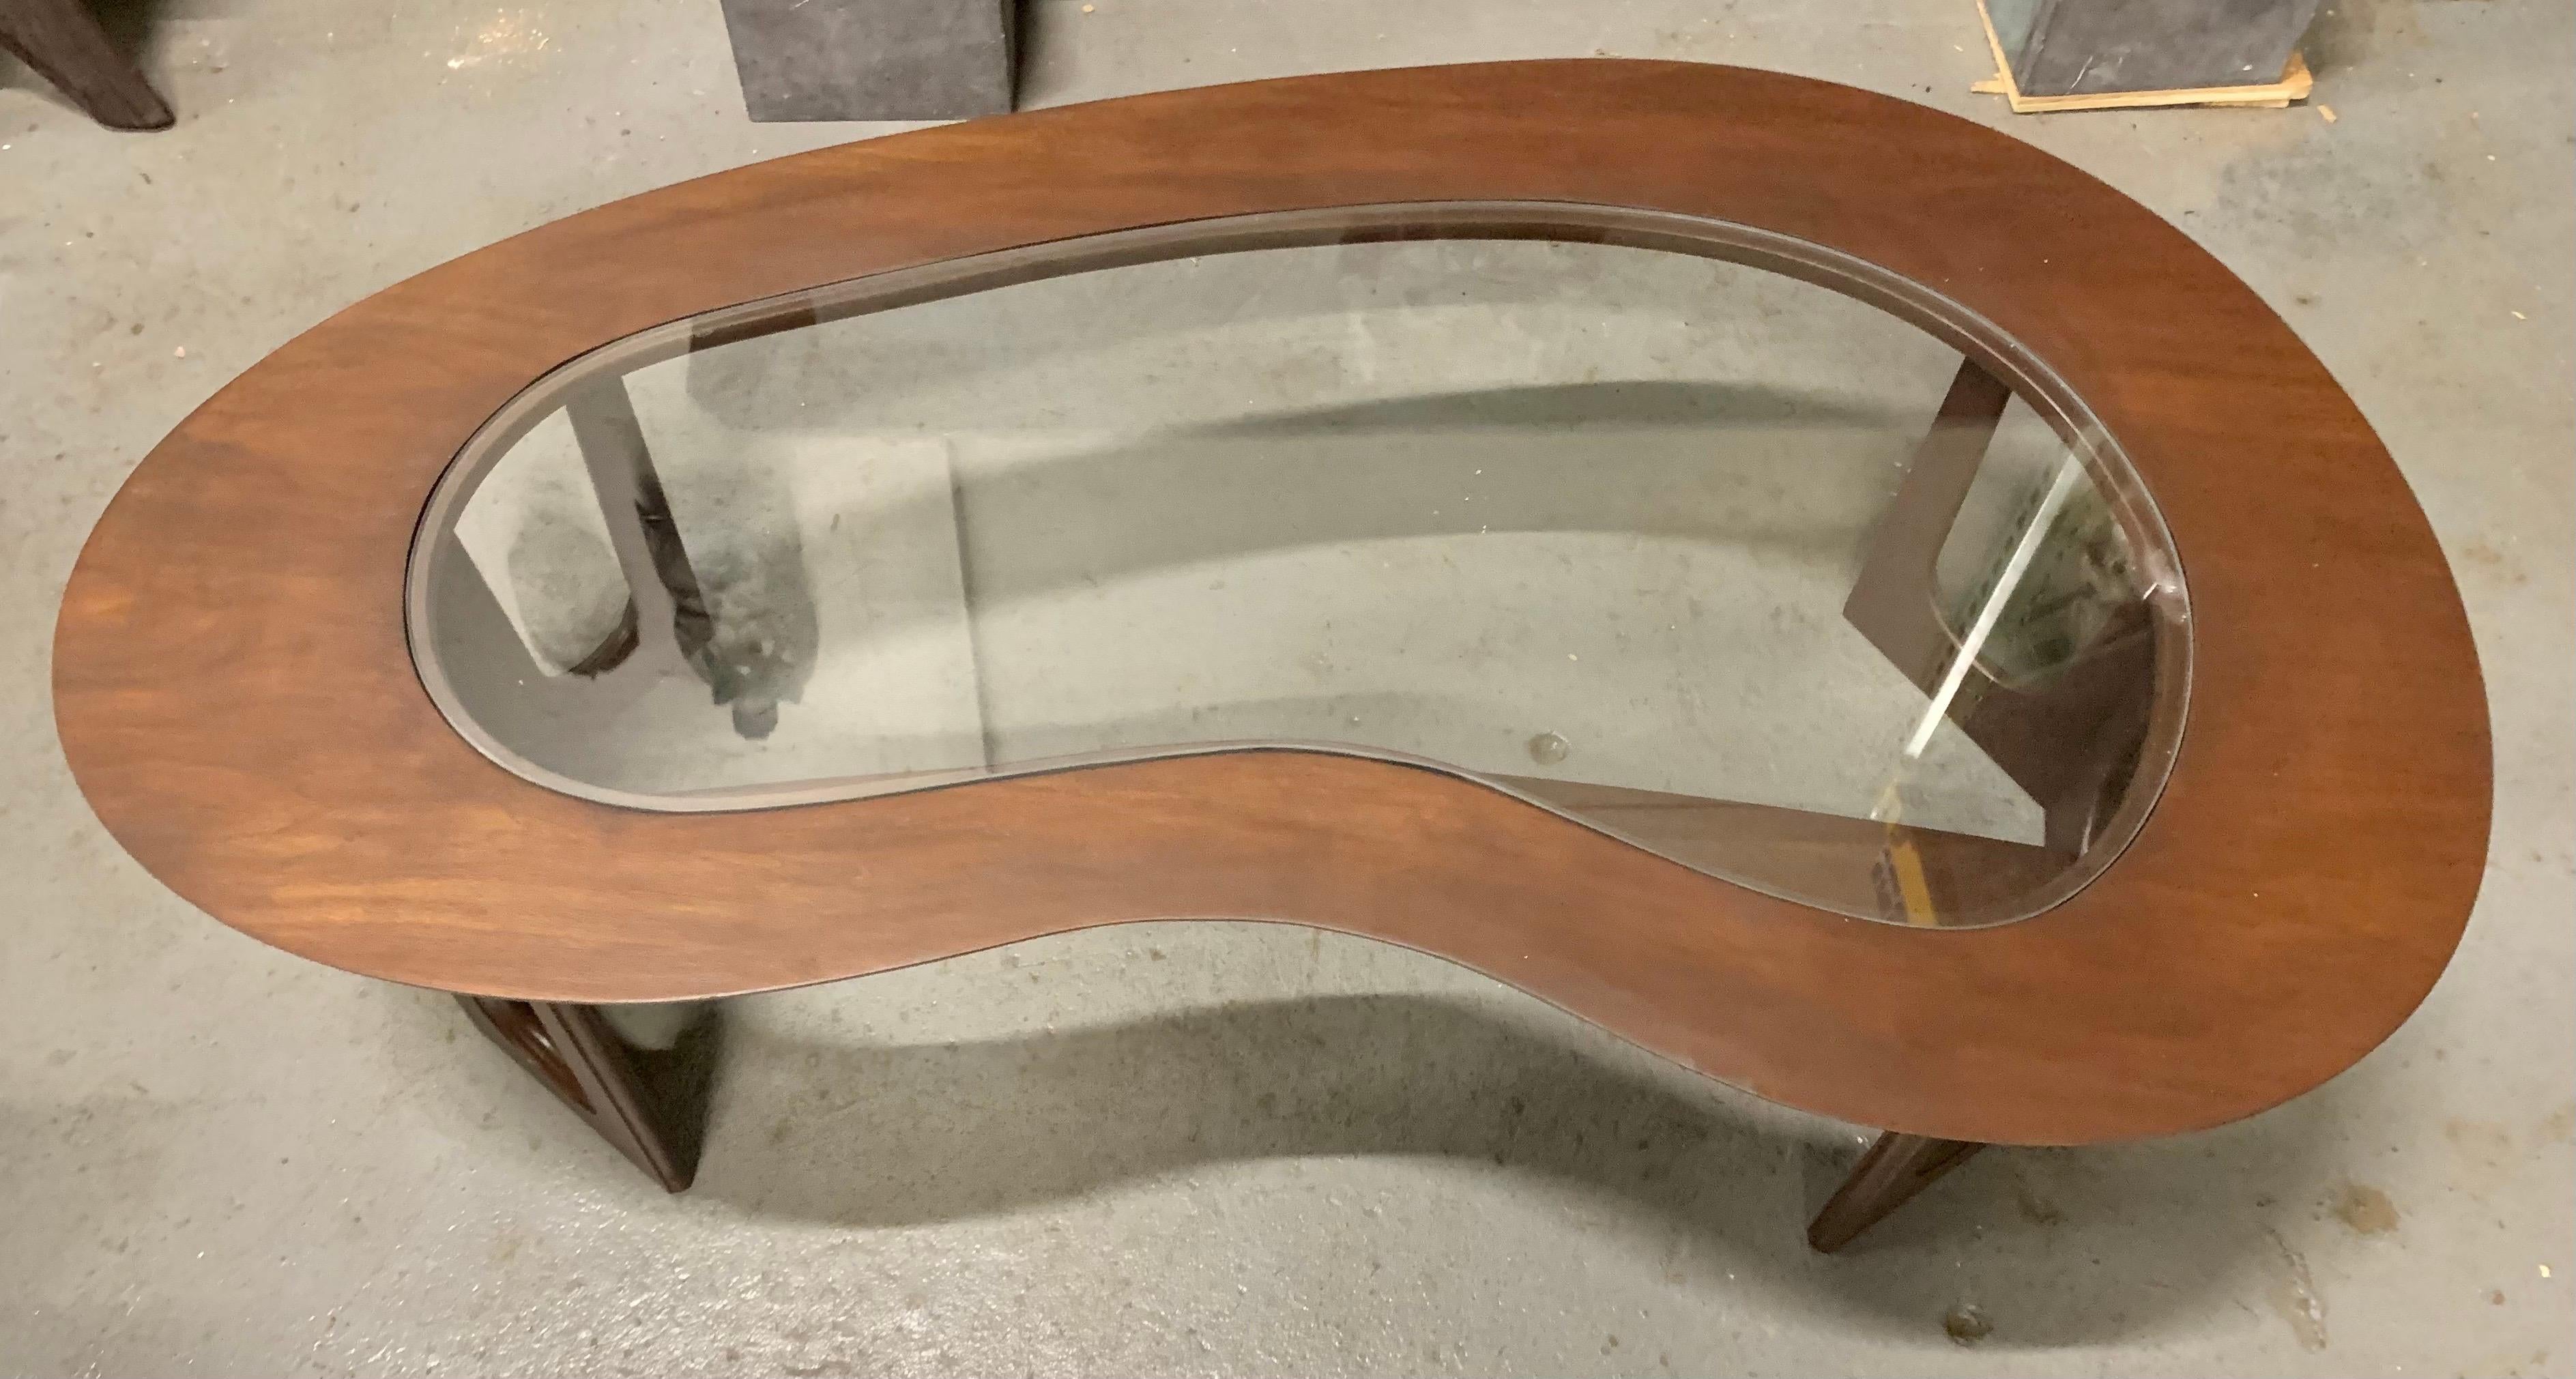 Curved midcentury kidney shaped cocktail table with glass insert top surrounded by walnut wood.
Now, more than ever, home is where the heart is.